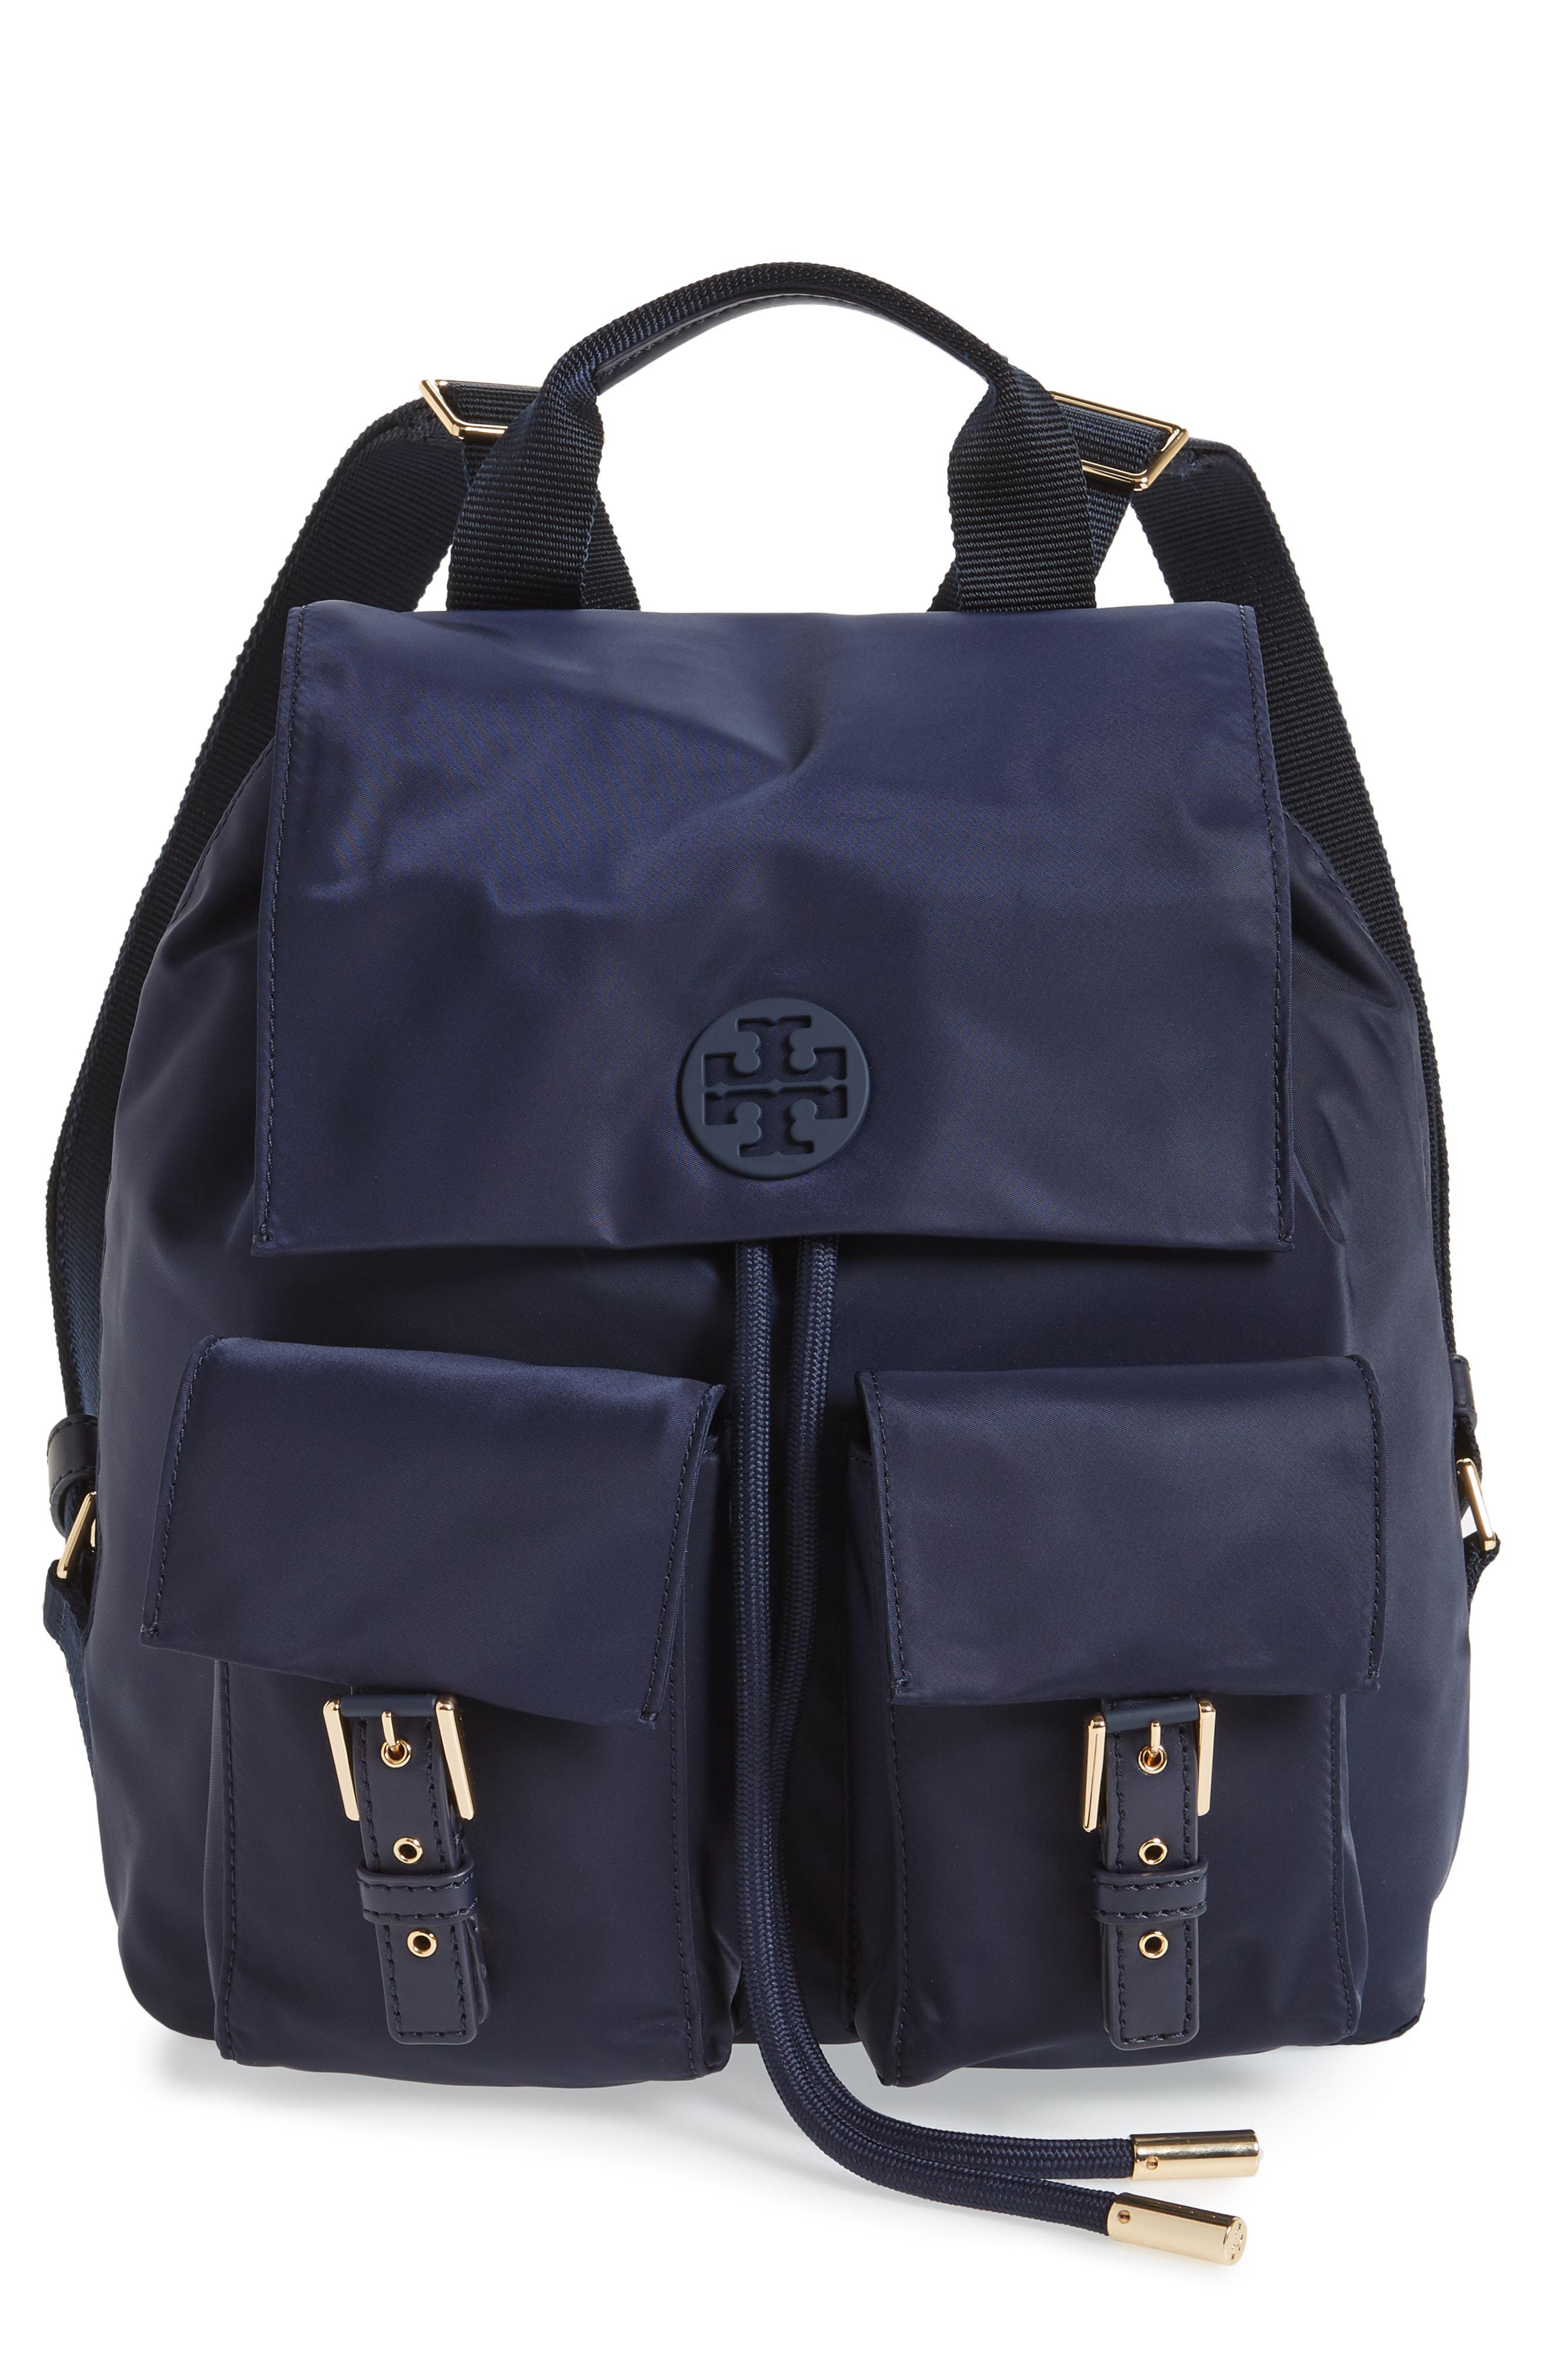 Tory Burch Synthetic Tilda Nylon Backpack in Blue - Lyst